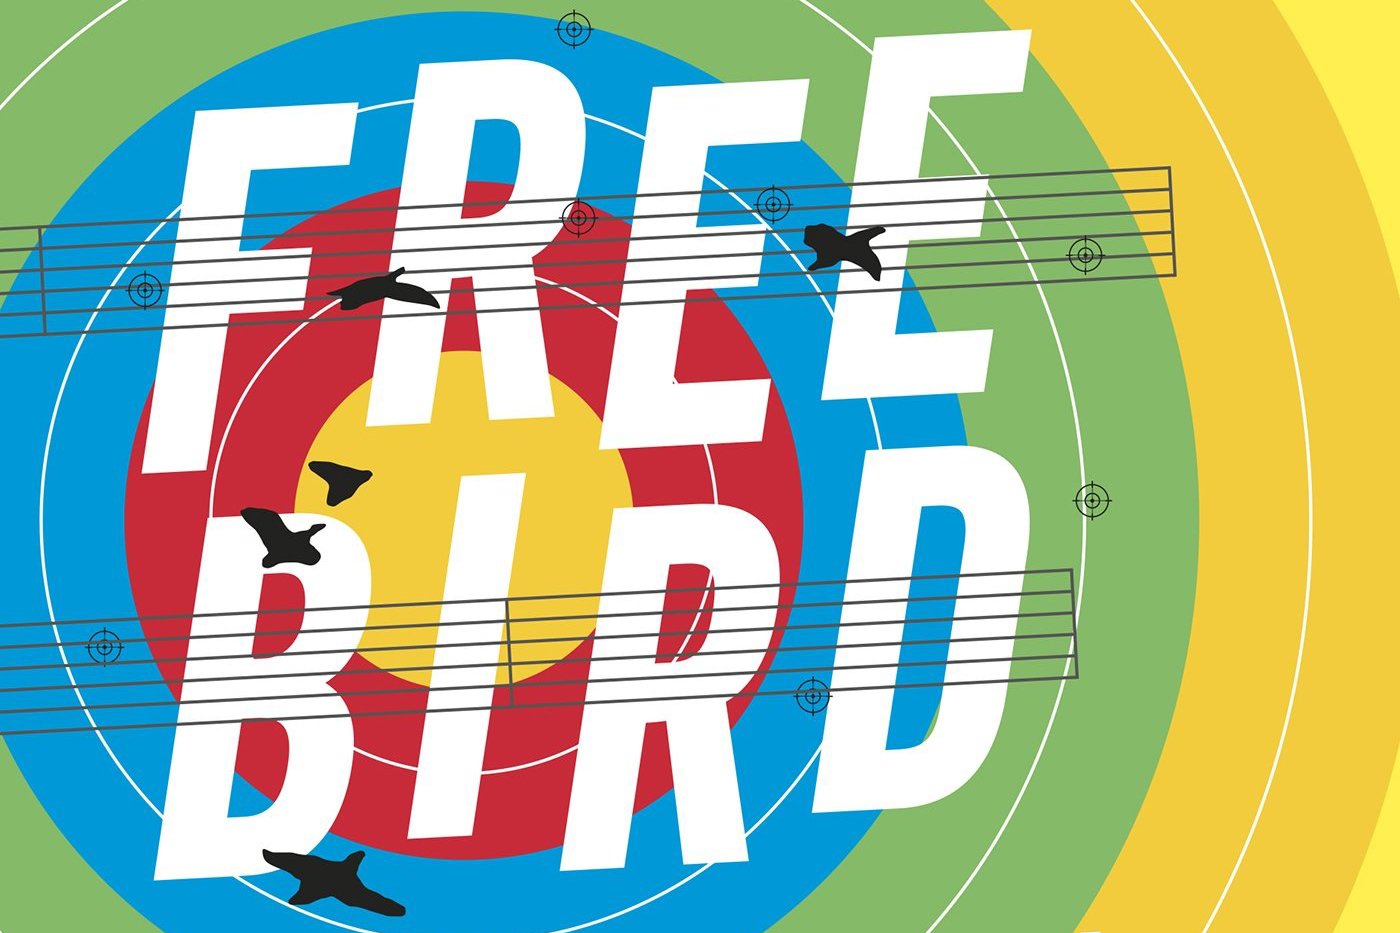 Jon Raymond’s ‘Freebird’ Is About the Conversations We Don’t Have With One Another